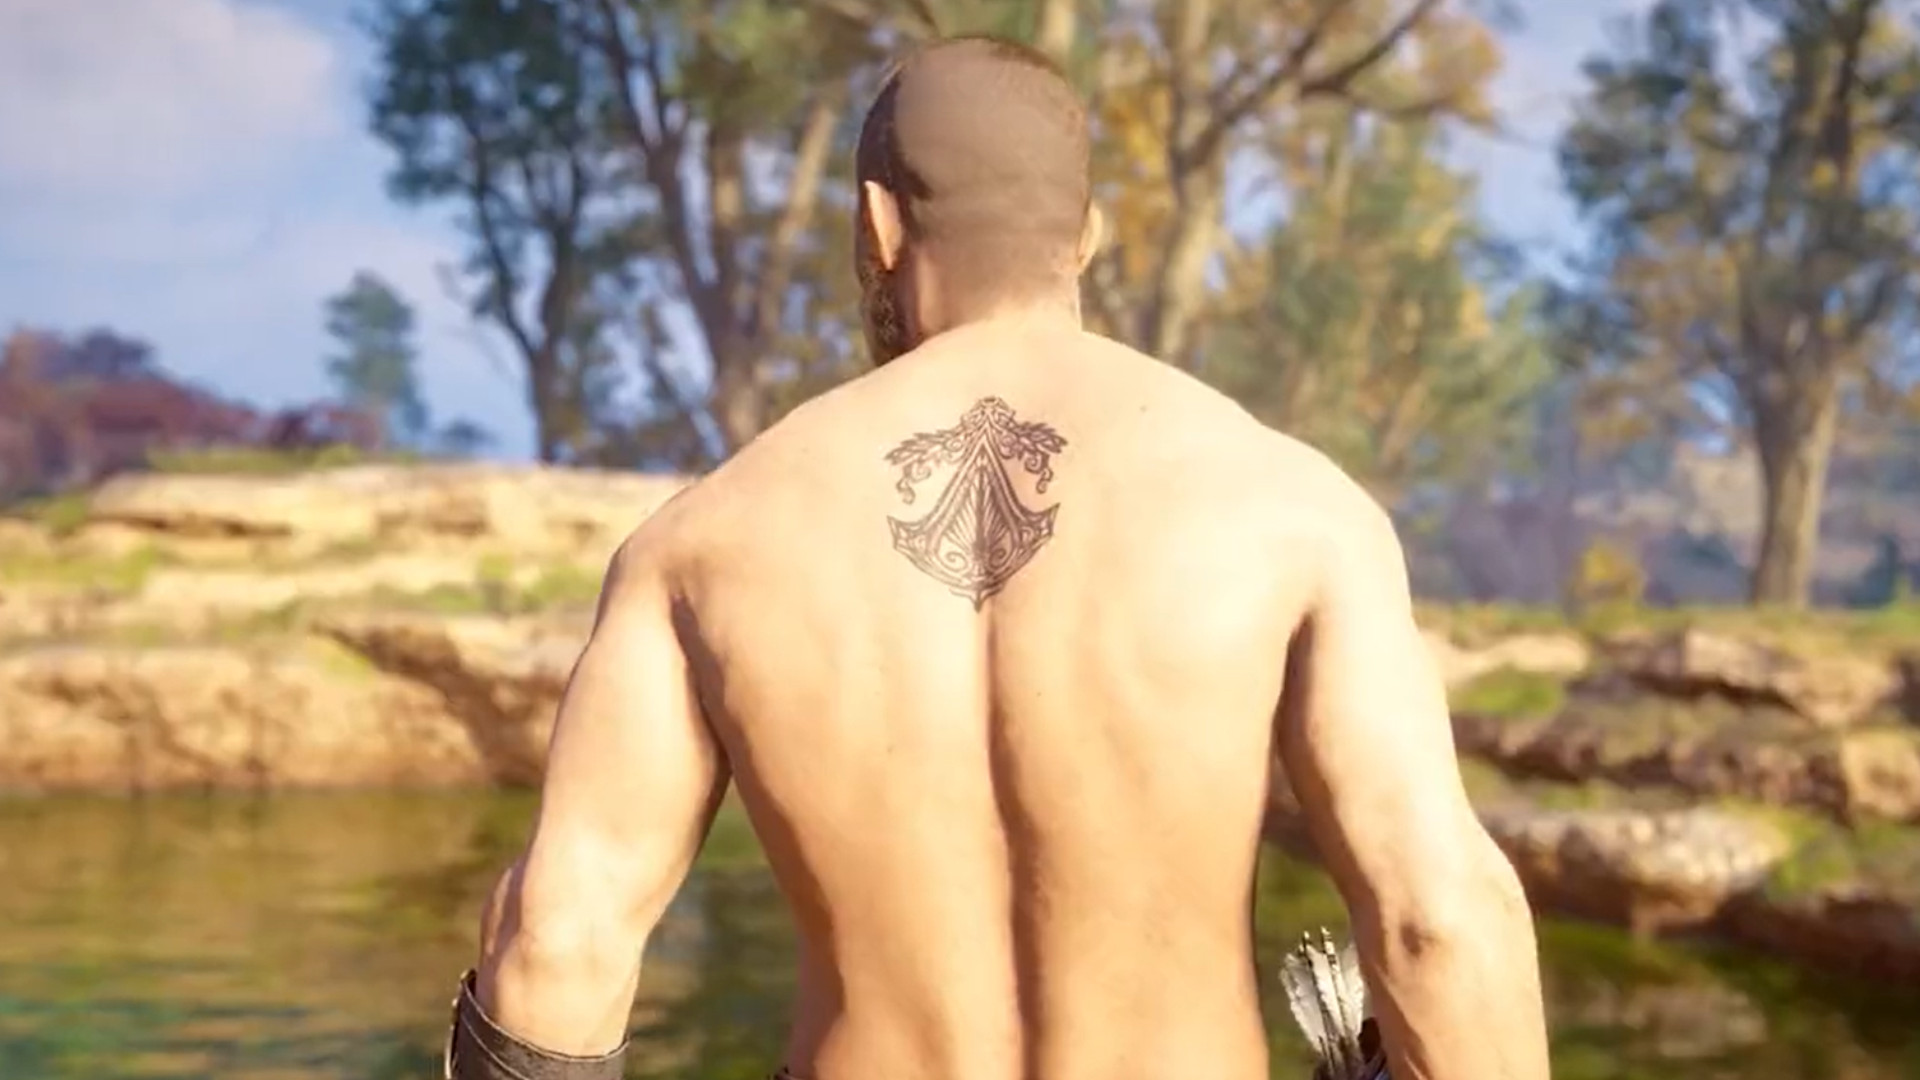 Valhalla gets a tattoo from the best Assassin's Creed